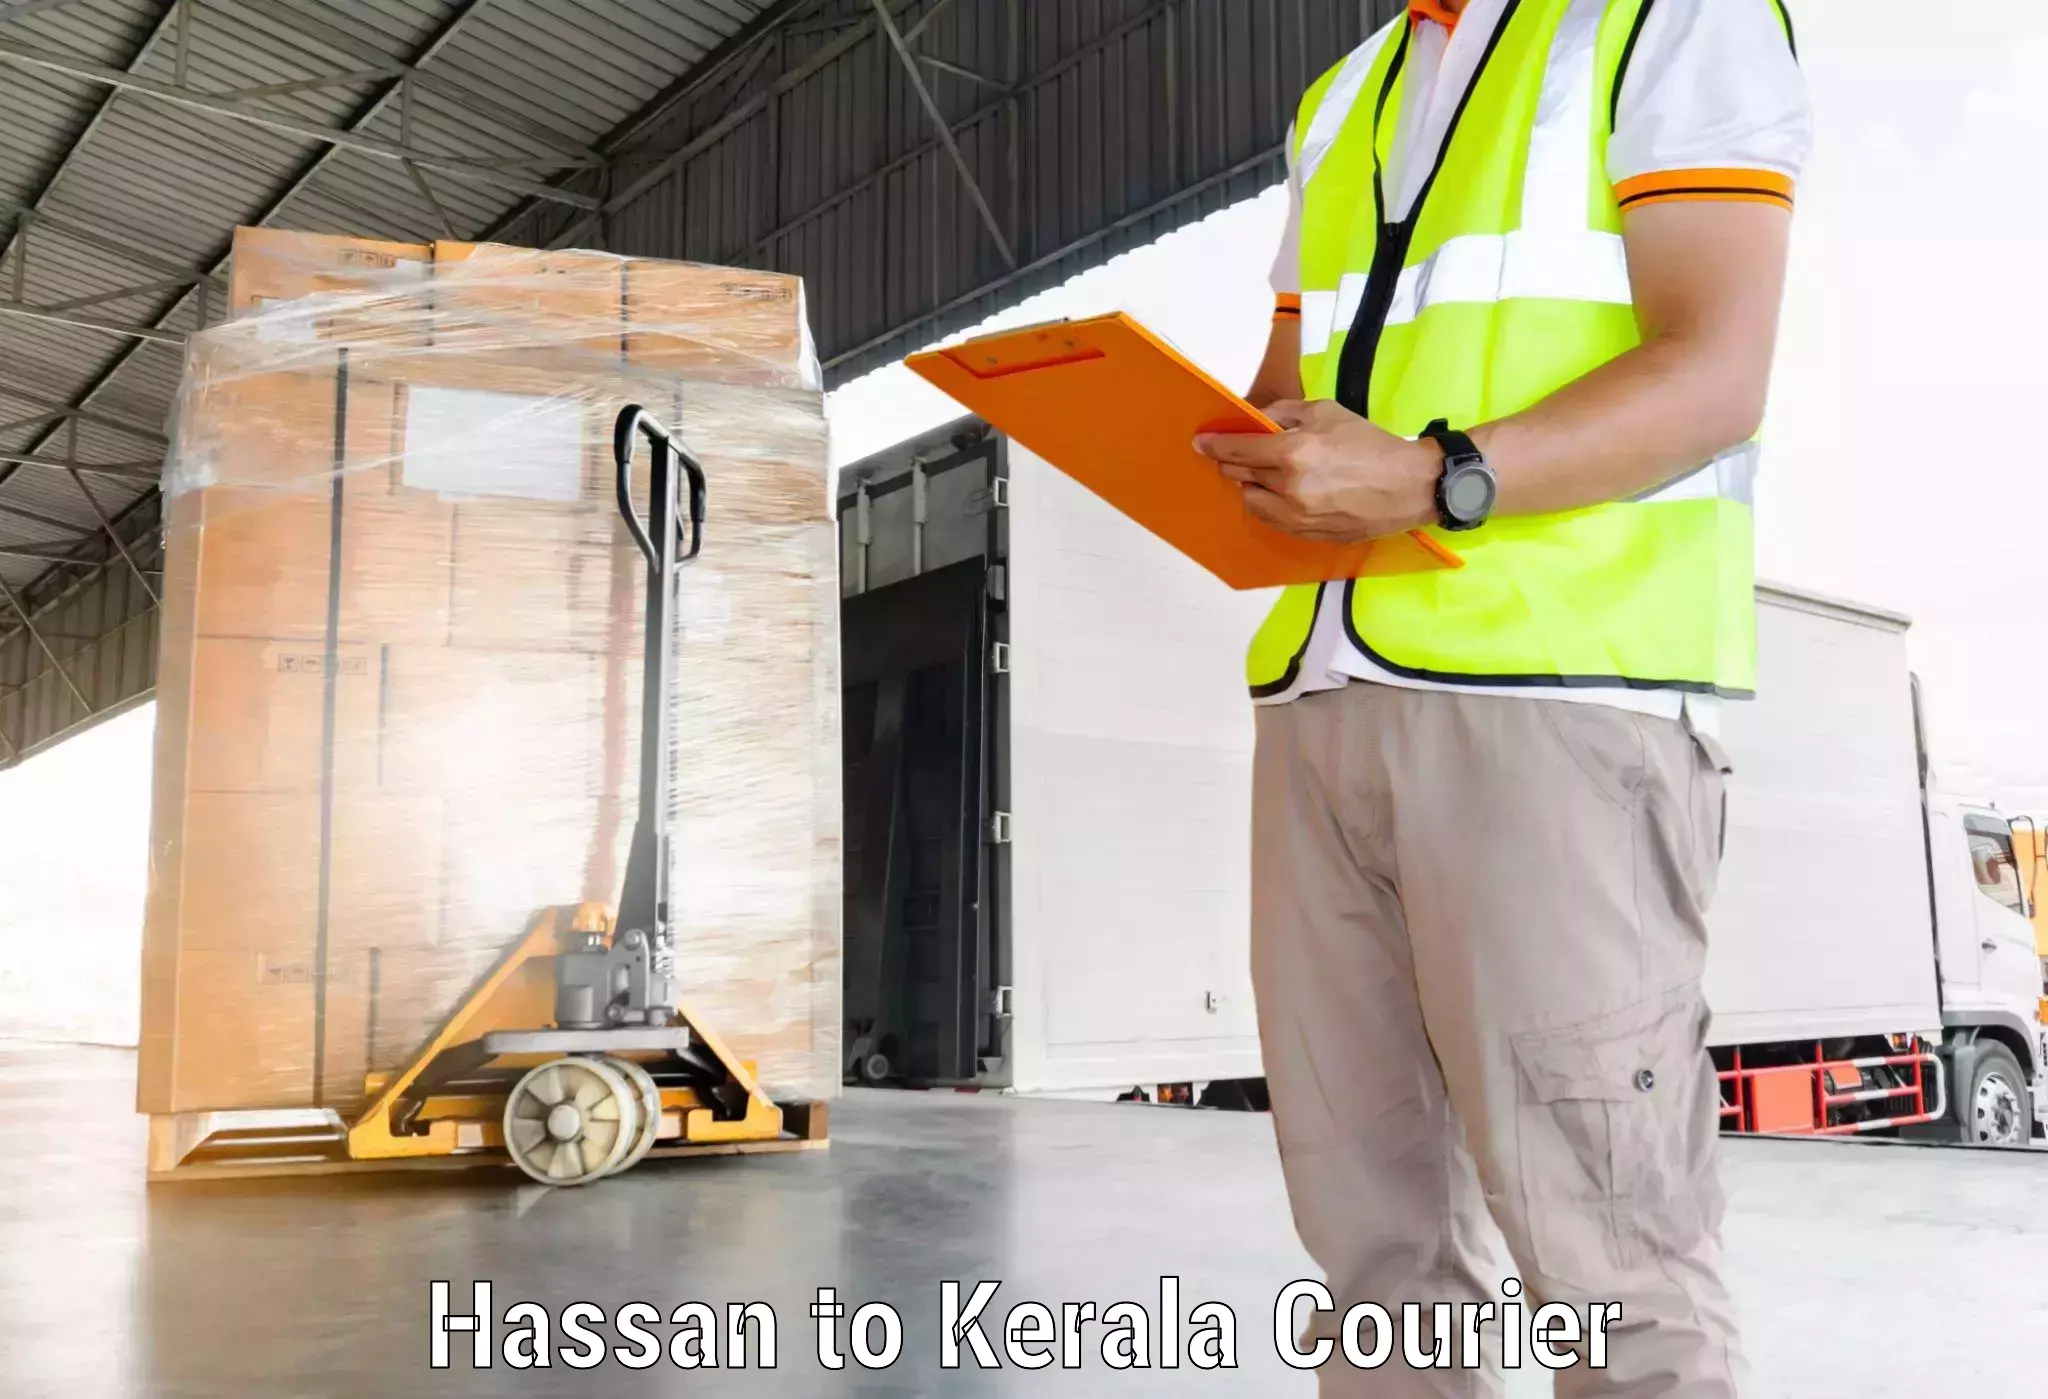 Flexible delivery scheduling in Hassan to Kerala